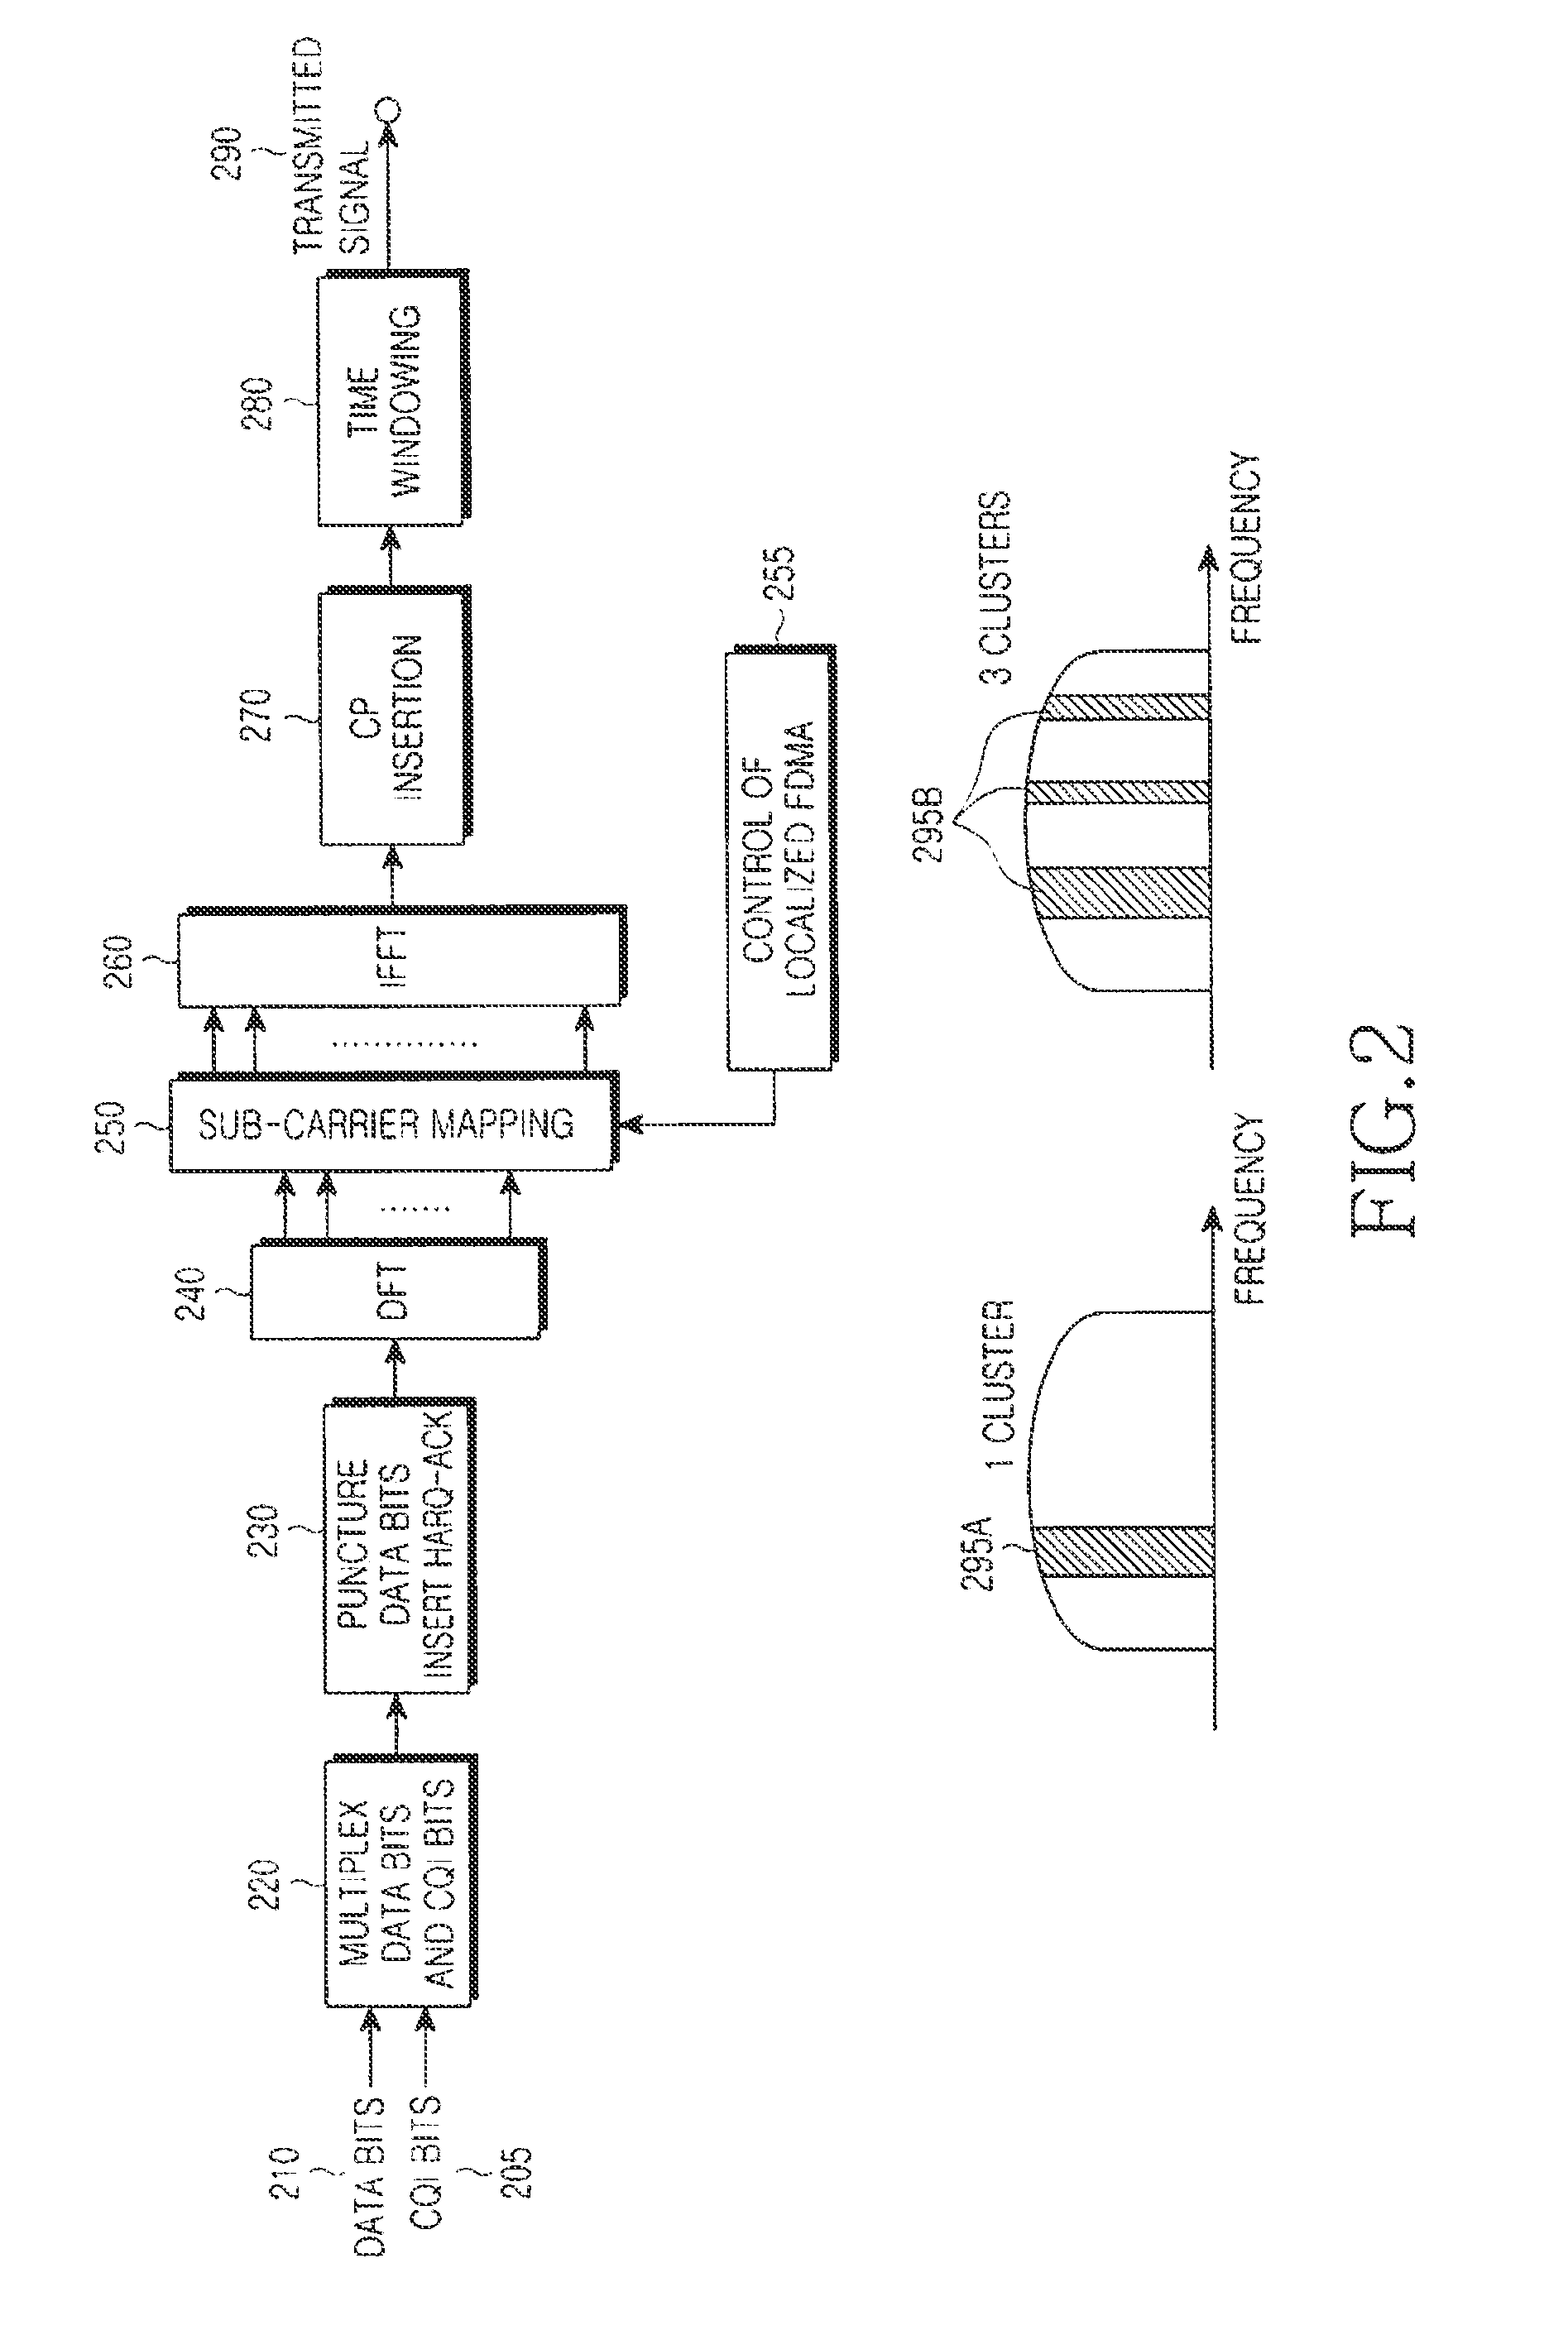 Transmitting uplink control information over a data channel or over a control channel